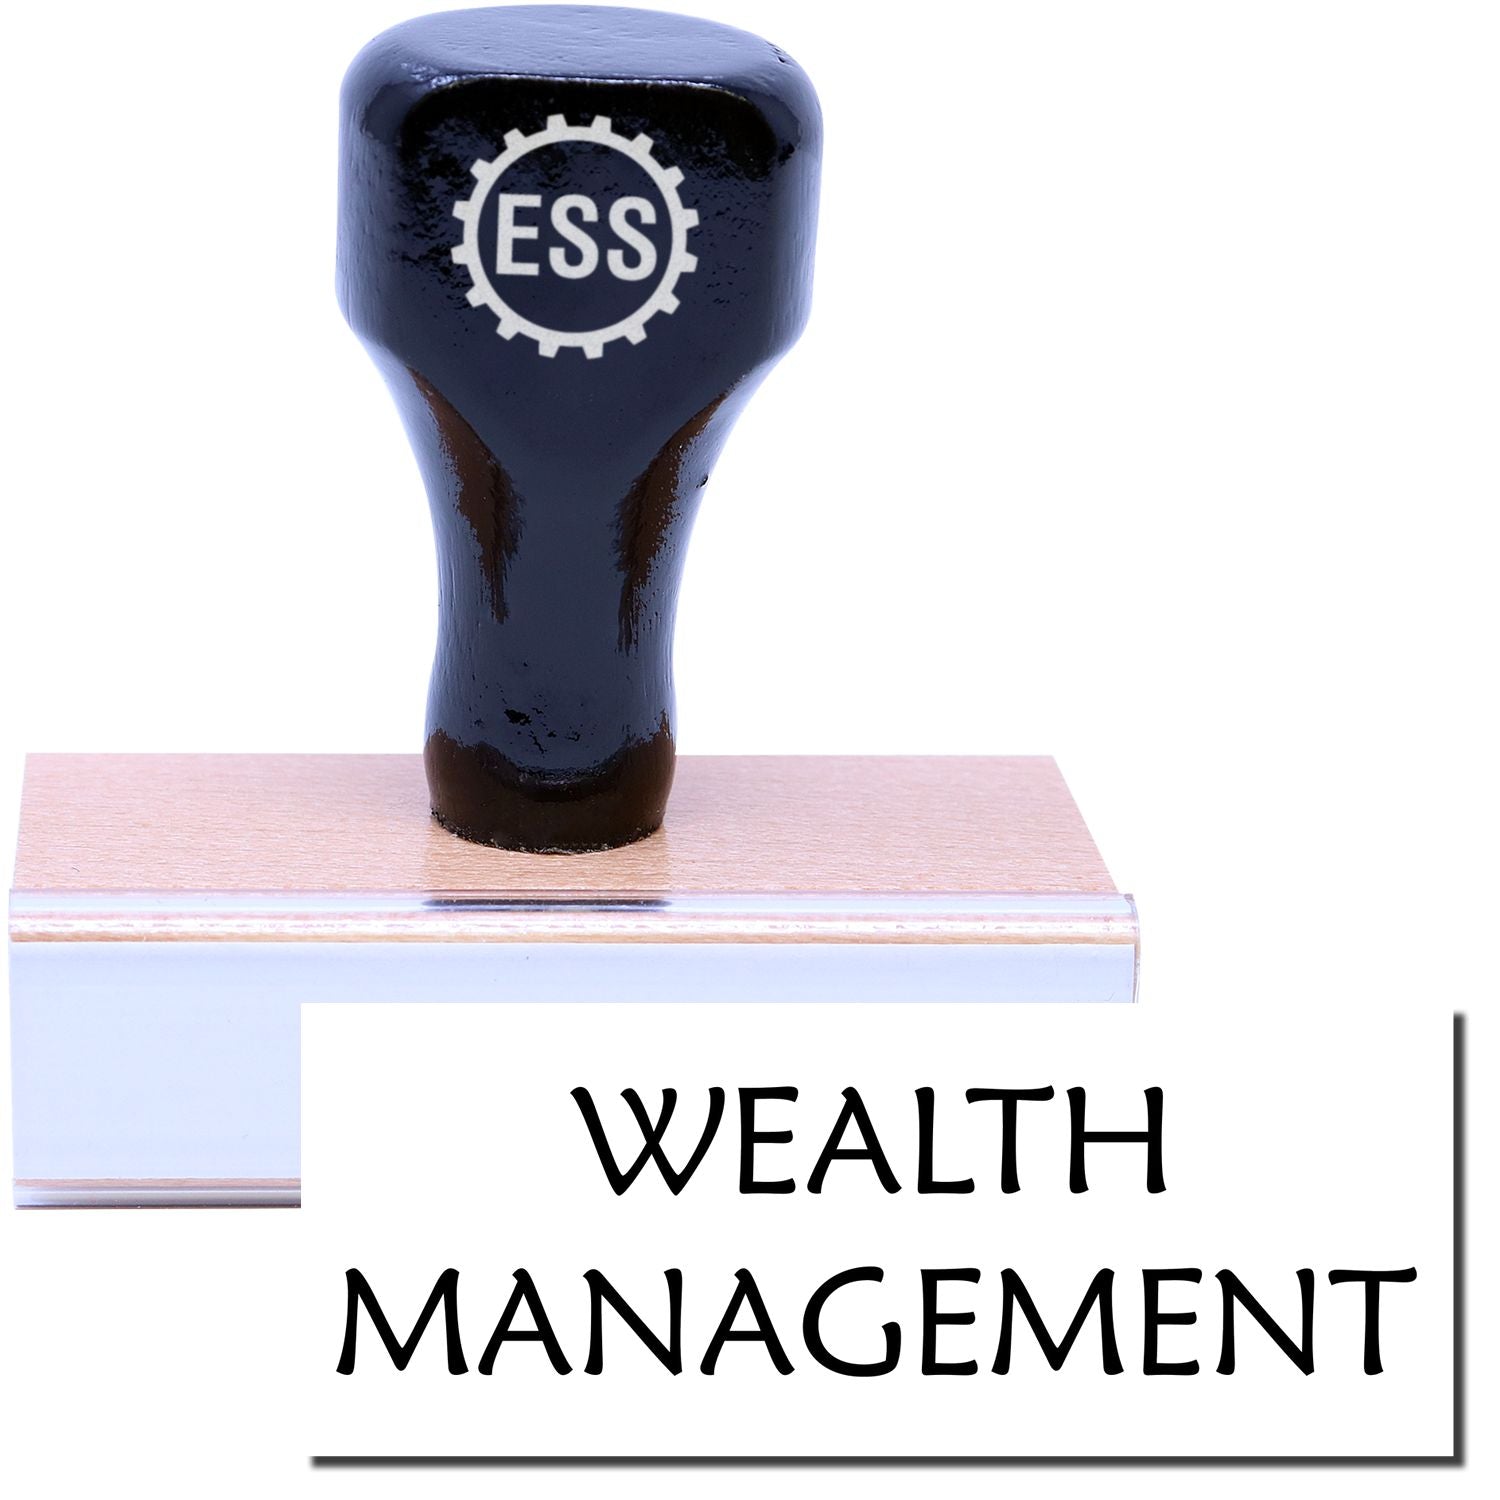 A stock office rubber stamp with a stamped image showing how the text "WEALTH MANAGEMENT" is displayed after stamping.